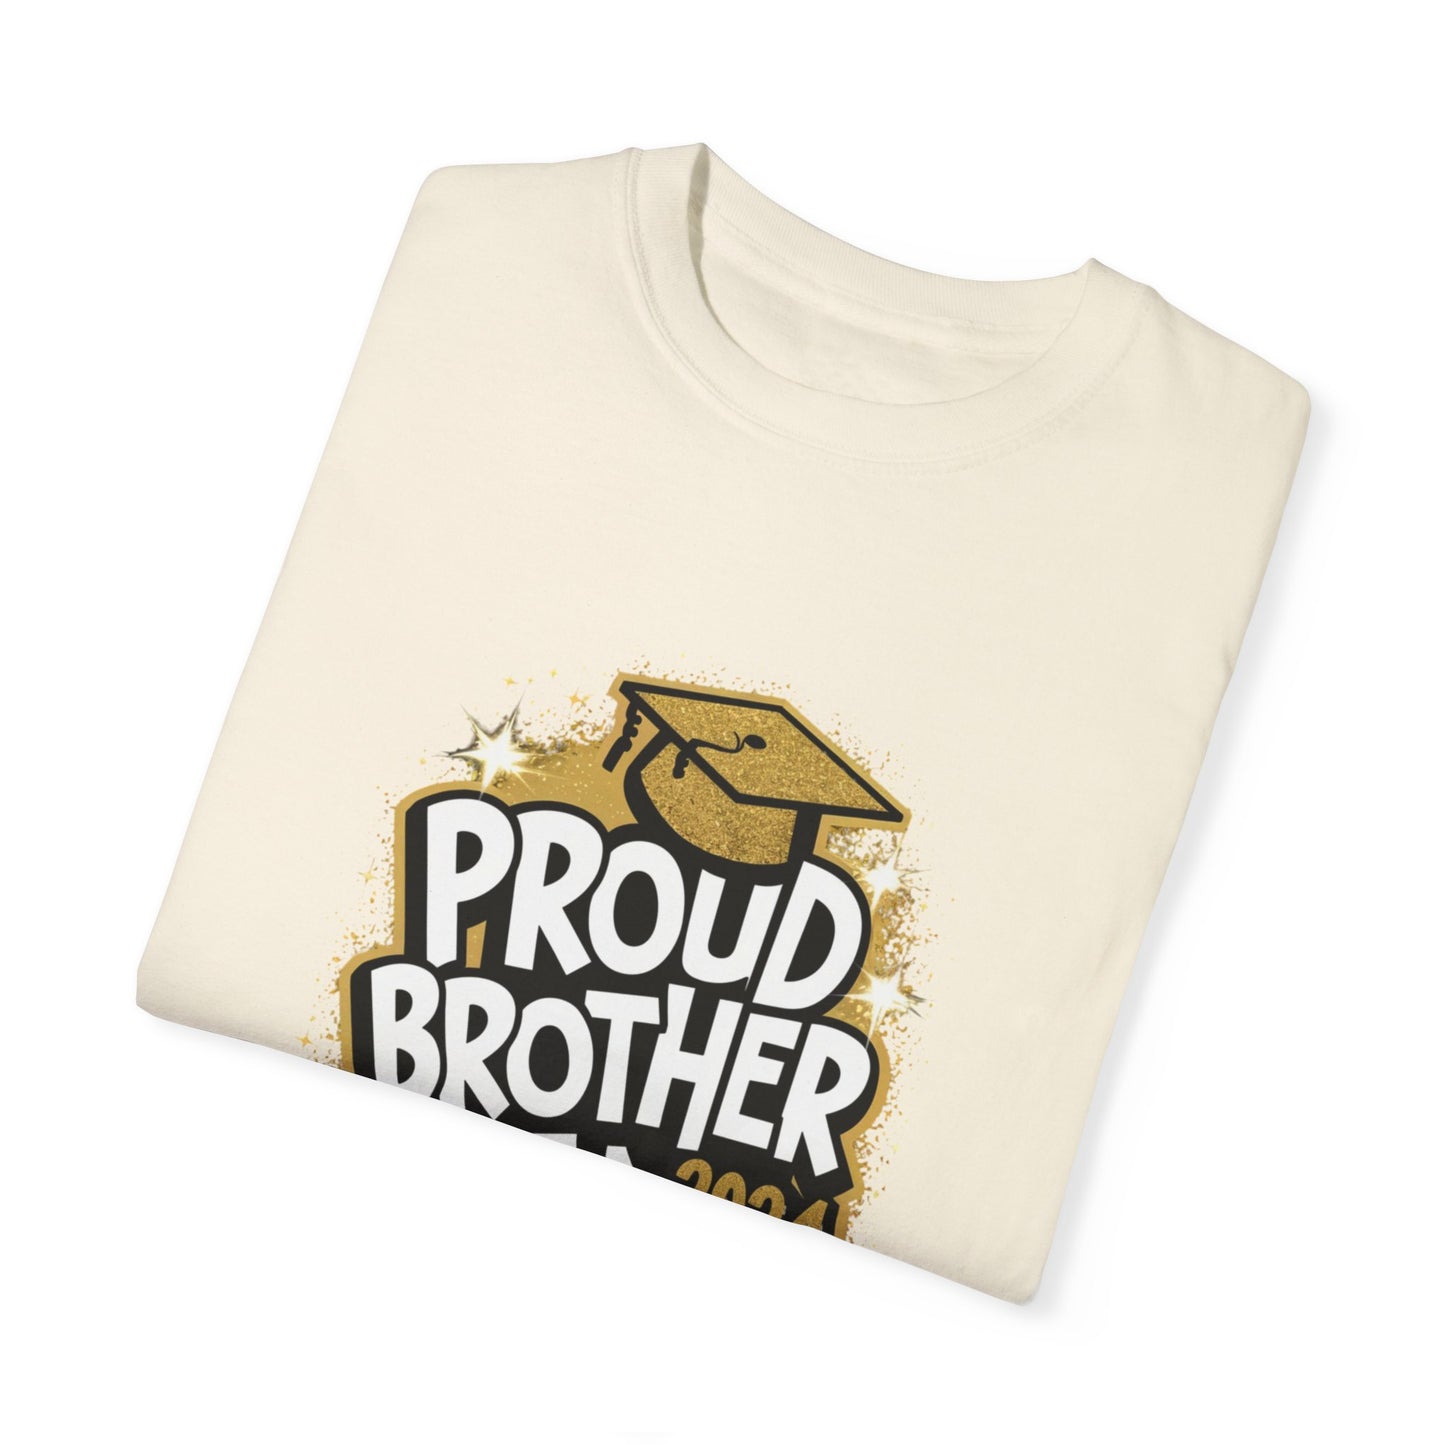 Proud Brother of a 2024 Graduate Unisex Garment-dyed T-shirt Cotton Funny Humorous Graphic Soft Premium Unisex Men Women Ivory T-shirt Birthday Gift-44